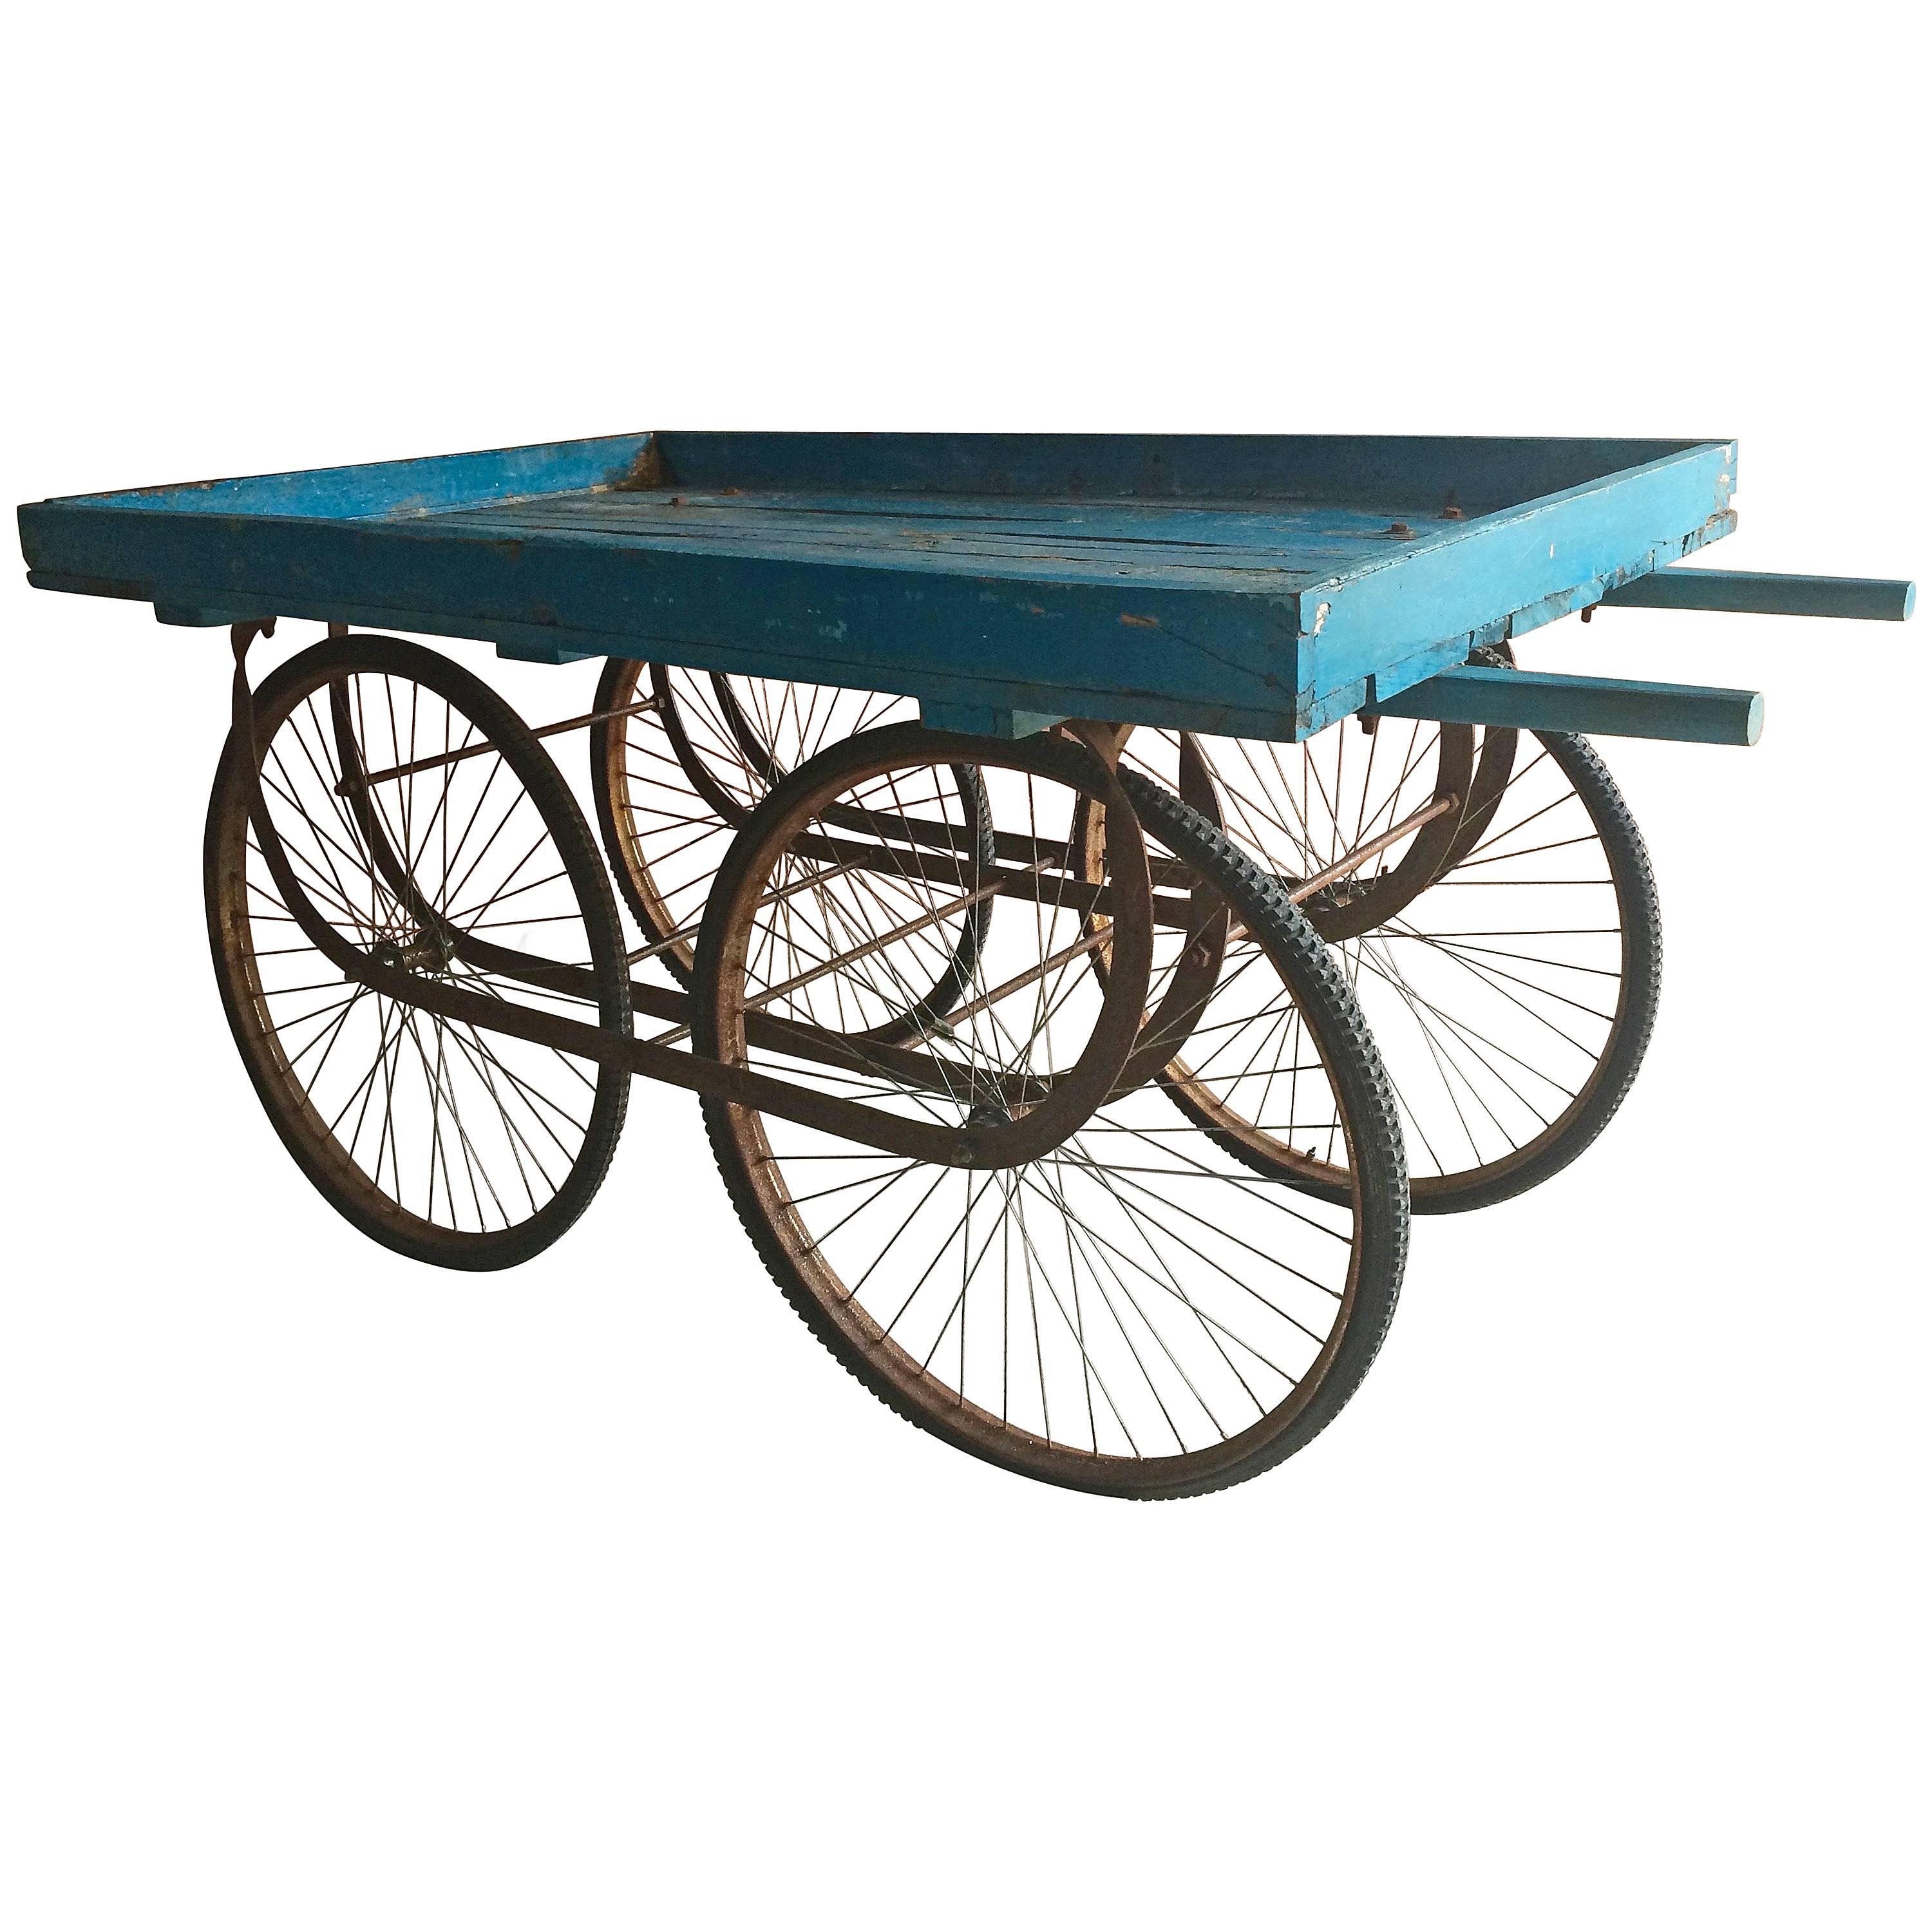 Antique Indian Market or Hand Cart Flower Stand Victorian, 20th Century, Rustic